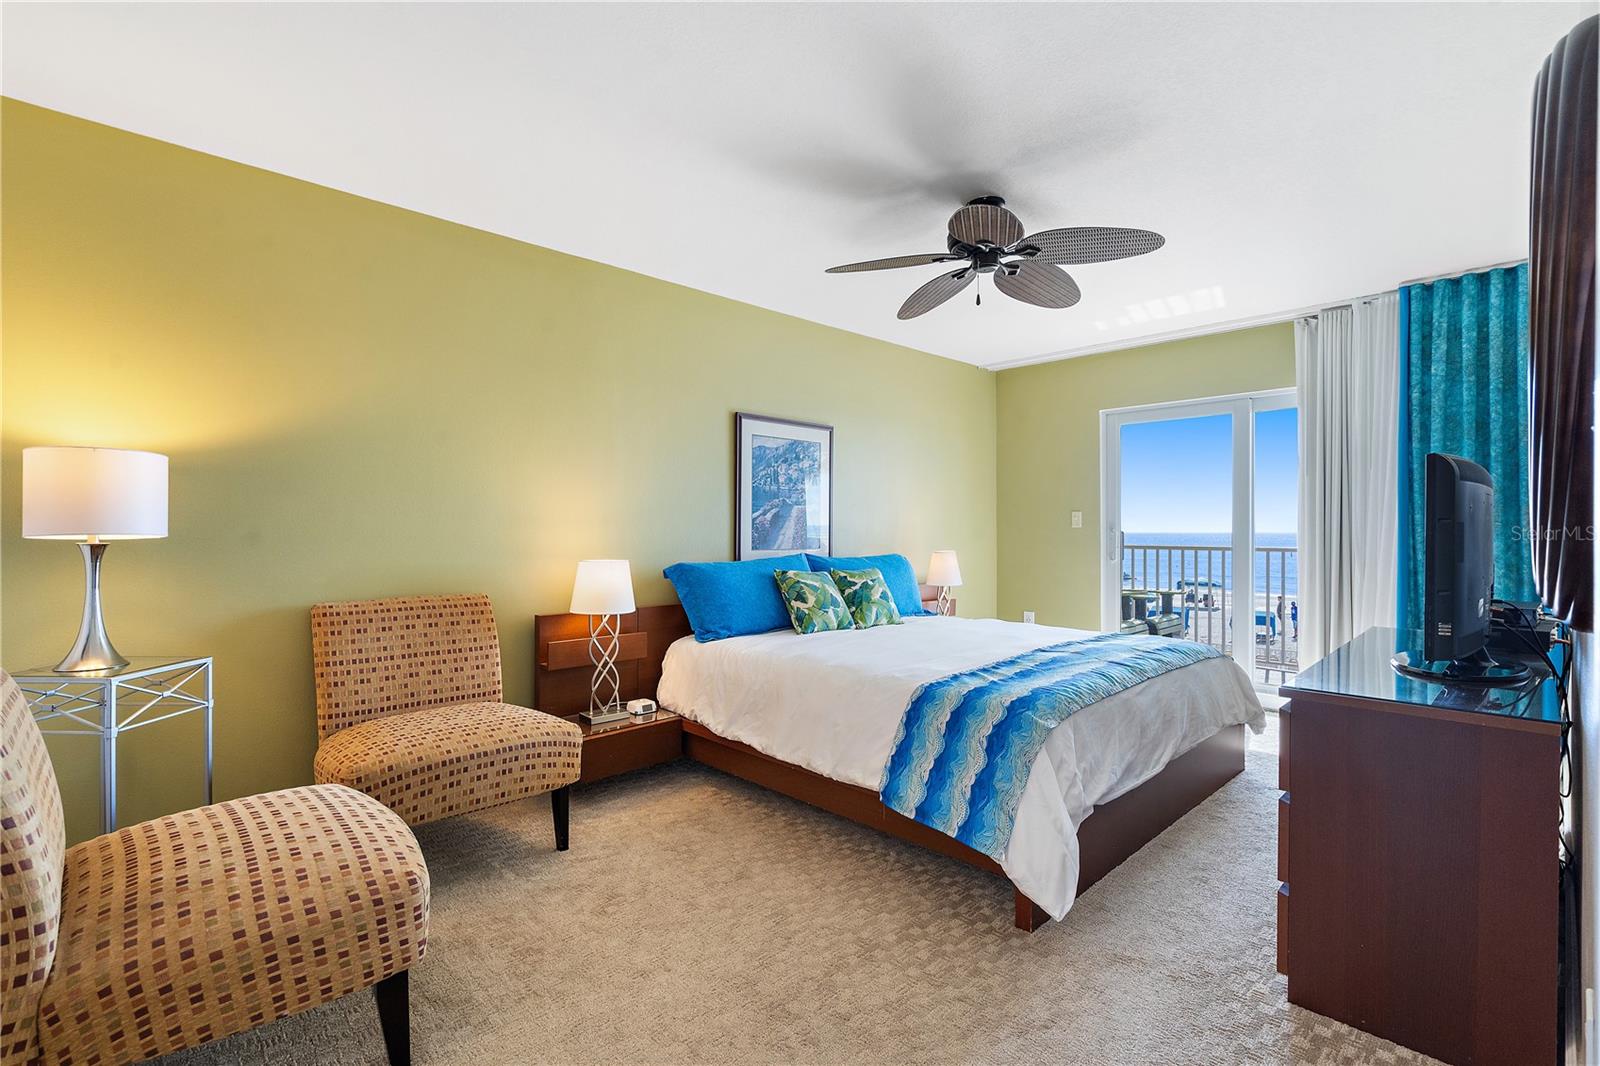 The spacious primary bedroom features a sitting area, a balcony with a water view, sheers, and blackout curtains. The carpet was chosen for maximum comfort, contributing to a memorable vacation experience.